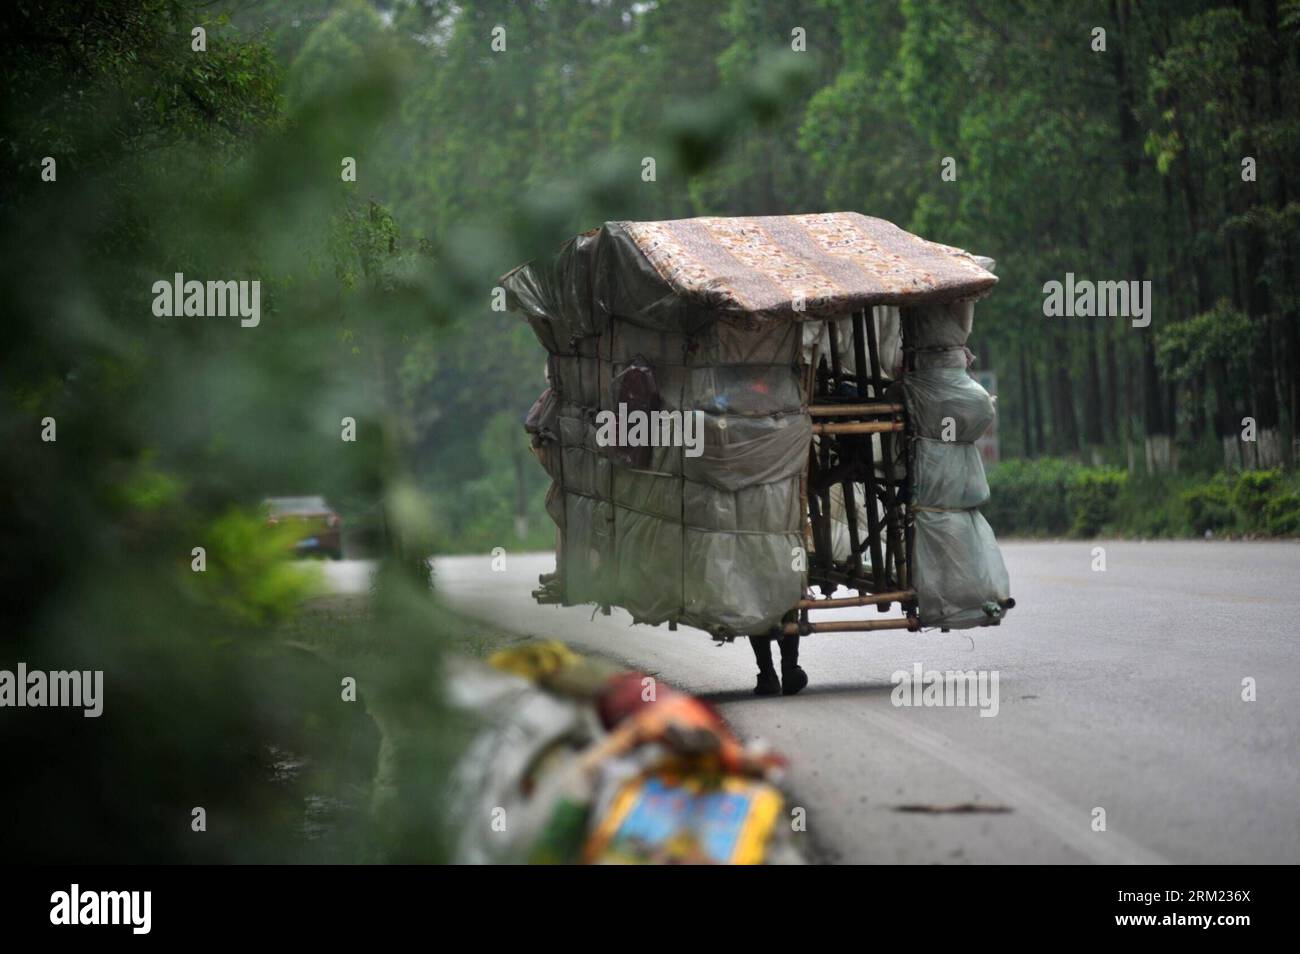 Bildnummer: 59677575  Datum: 21.05.2013  Copyright: imago/Xinhua LIUZHOU -- Liu Lingchao carries his moving hut on a road in Liucheng County of Liuzhou City, south China s Guangxi Zhuang Autonomous Region, May 21, 2013. Liu, a 38-year-old migrant worker from Liuzhou s Rong an County, decided to make a moving hut five years ago in Guangdong Province to live in on his way to Rong an, his hometown. The hut measures about 60 kilograms in weight, 1.5 meters in length and 2.2 meters in height. Since then, Liu has been carrying a hut and making a living by collecting rubbishes along the way. Having w Stock Photo